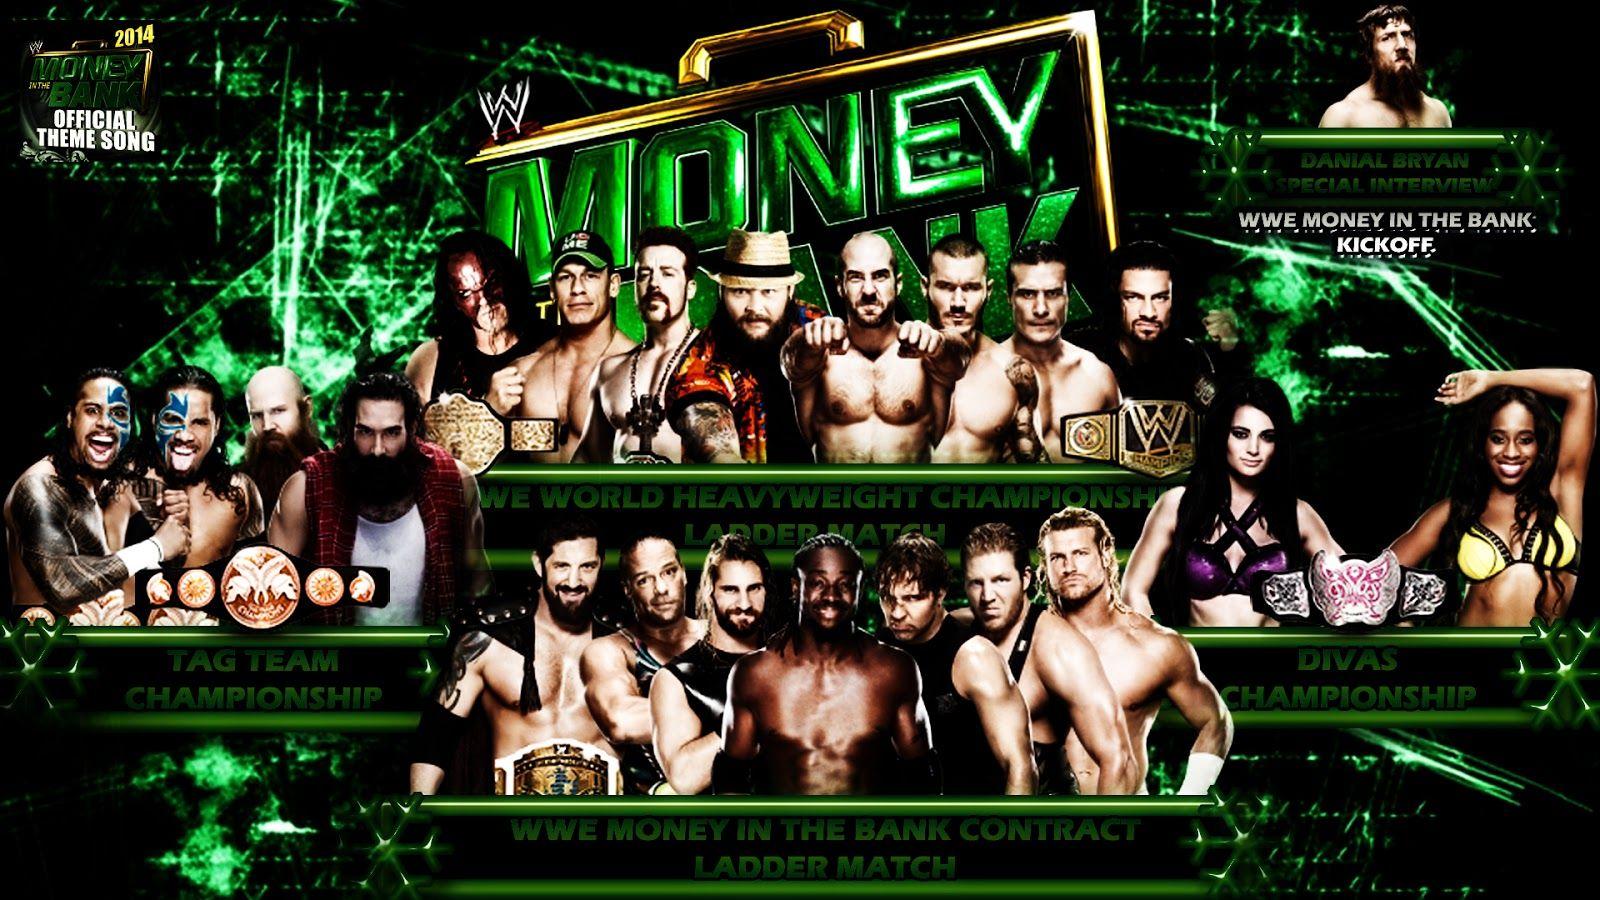 WWE Money in the Bank 2014. WWE Match Cards Wallpaper